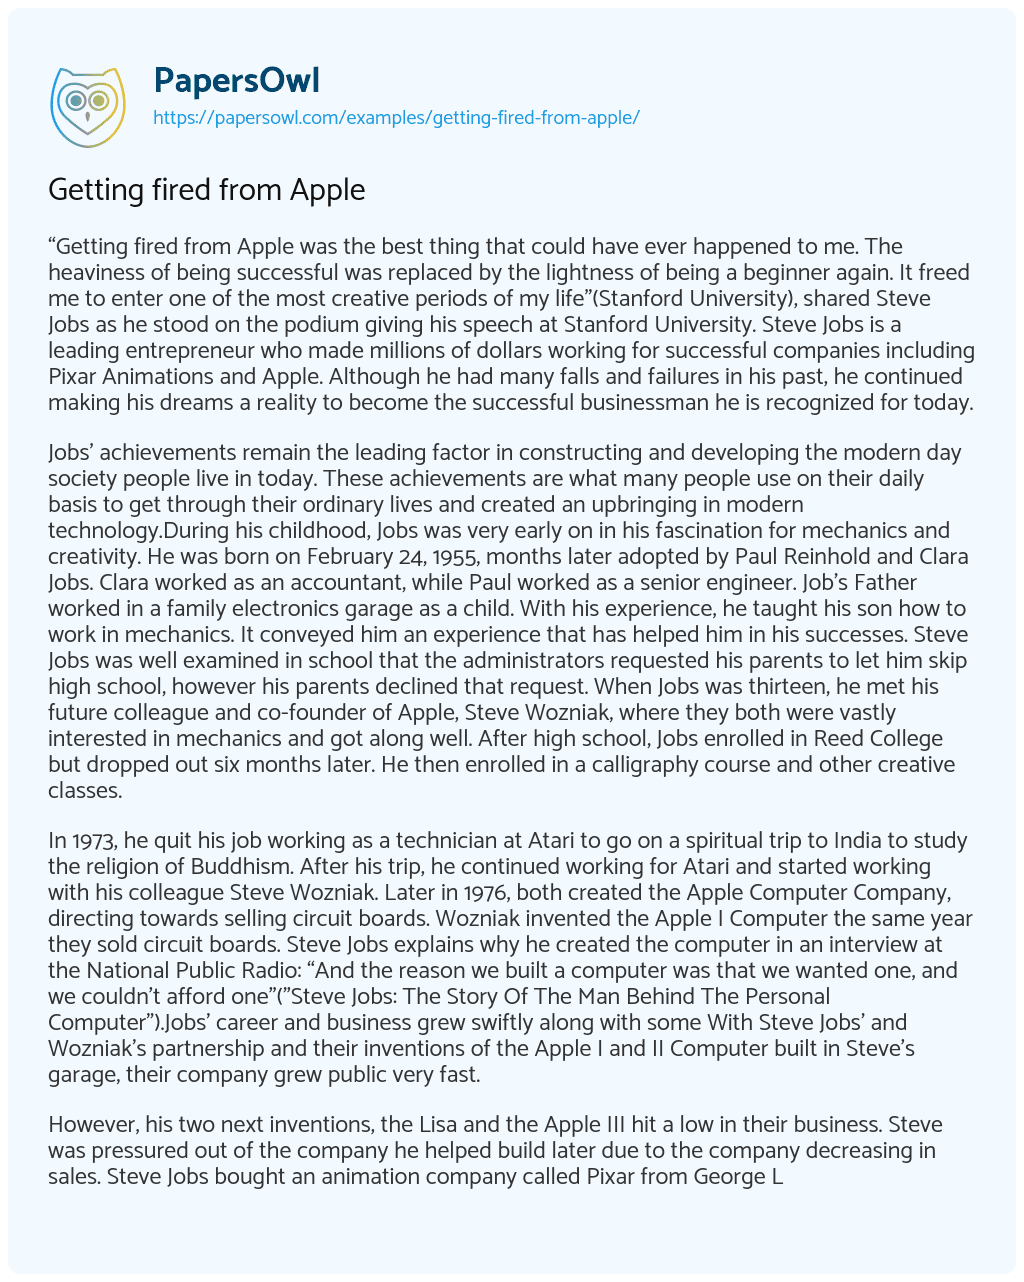 Essay on Getting Fired from Apple